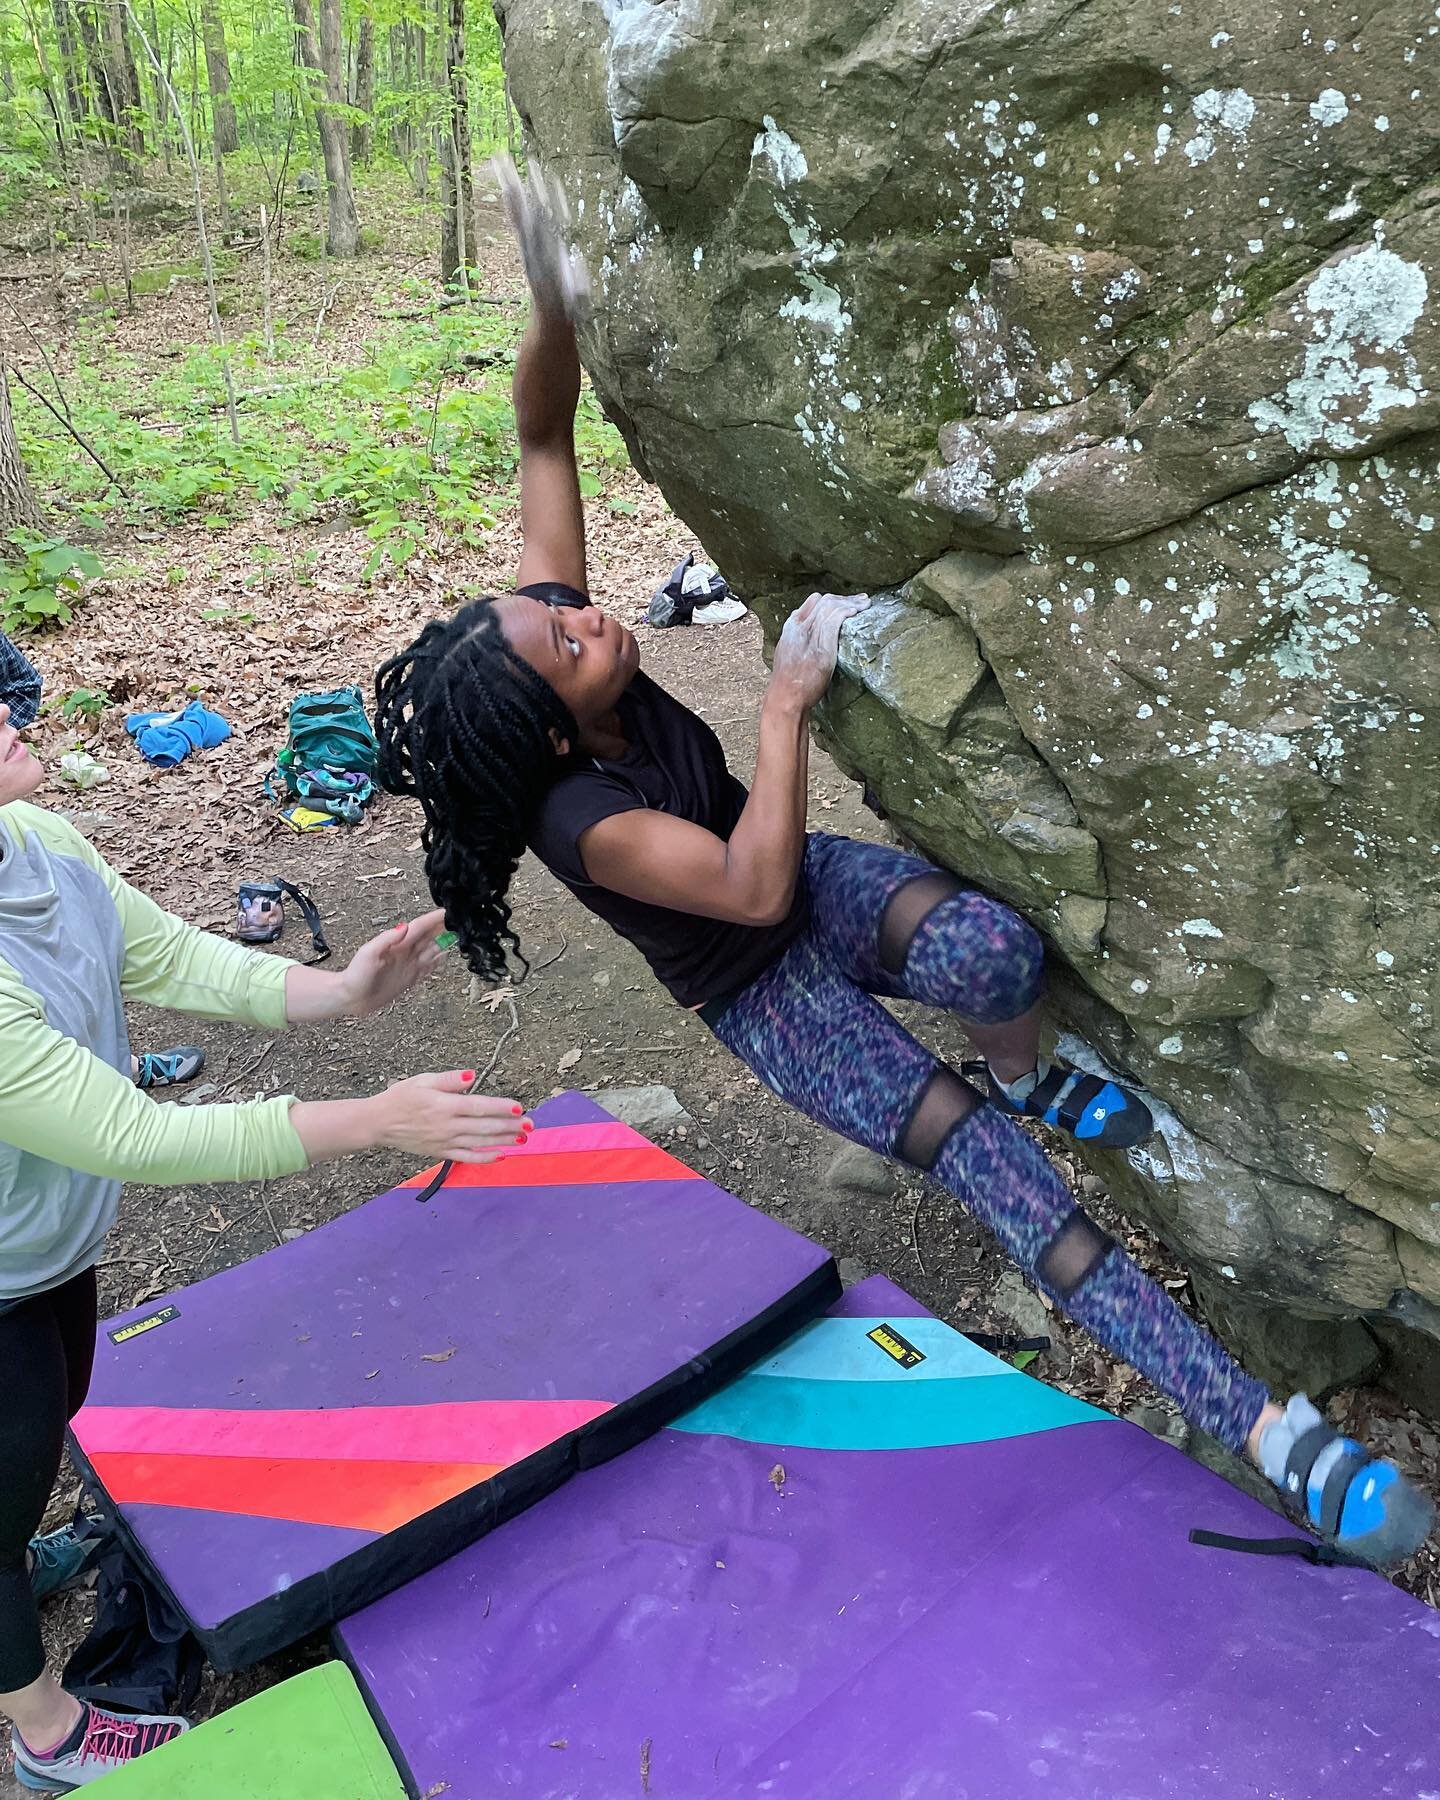 Ascent does #bouldering clinics?! Yes. Yes we do! 
&bull;
We still have a couple spots left in our bouldering &amp; #climbing technique workshop with @facetheclimb
&bull;
Give outdoor bouldering a try and get some on the wall coaching from a total pr